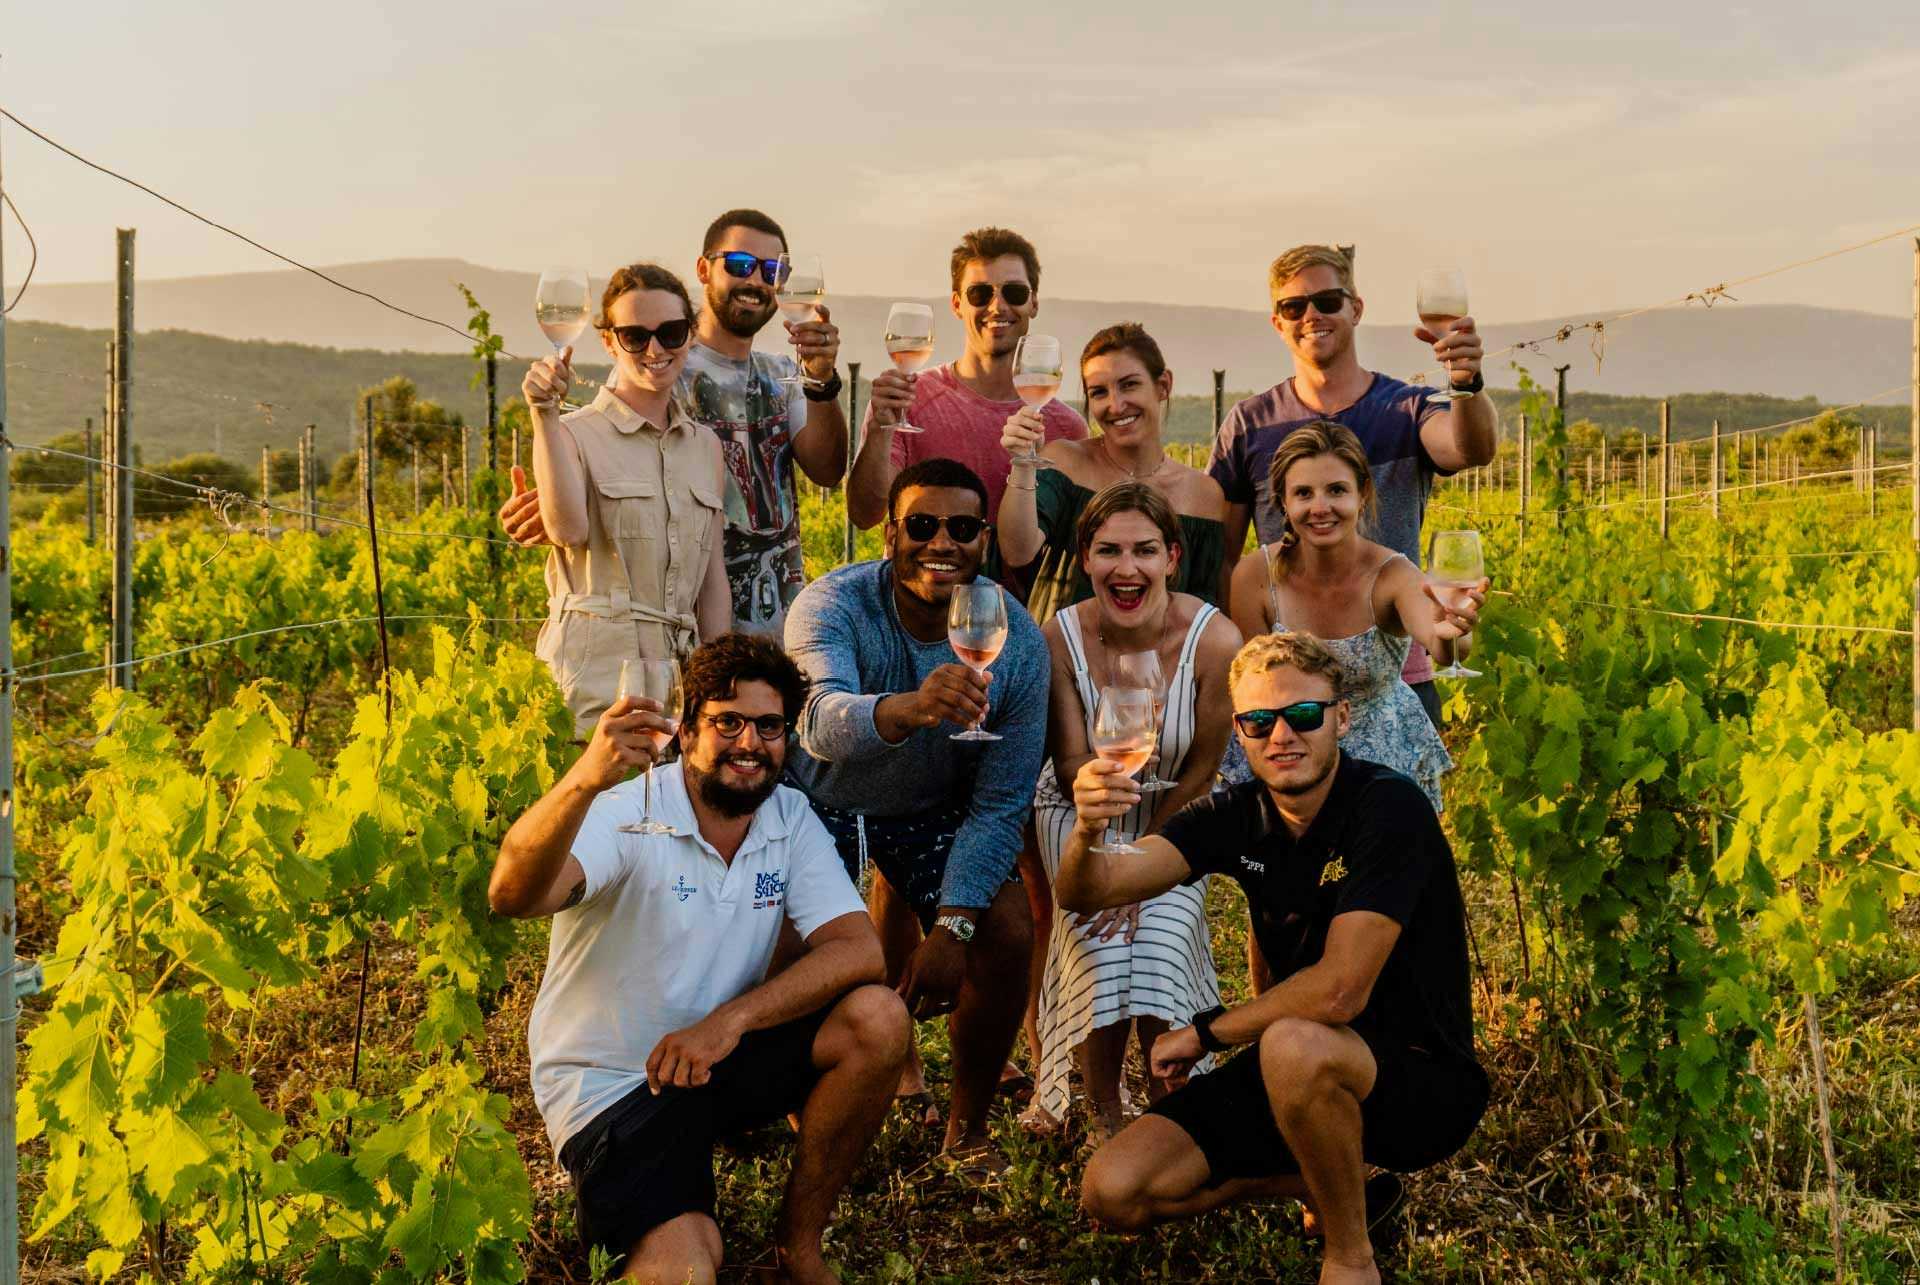 Group of people pose for a photo amongst some vines